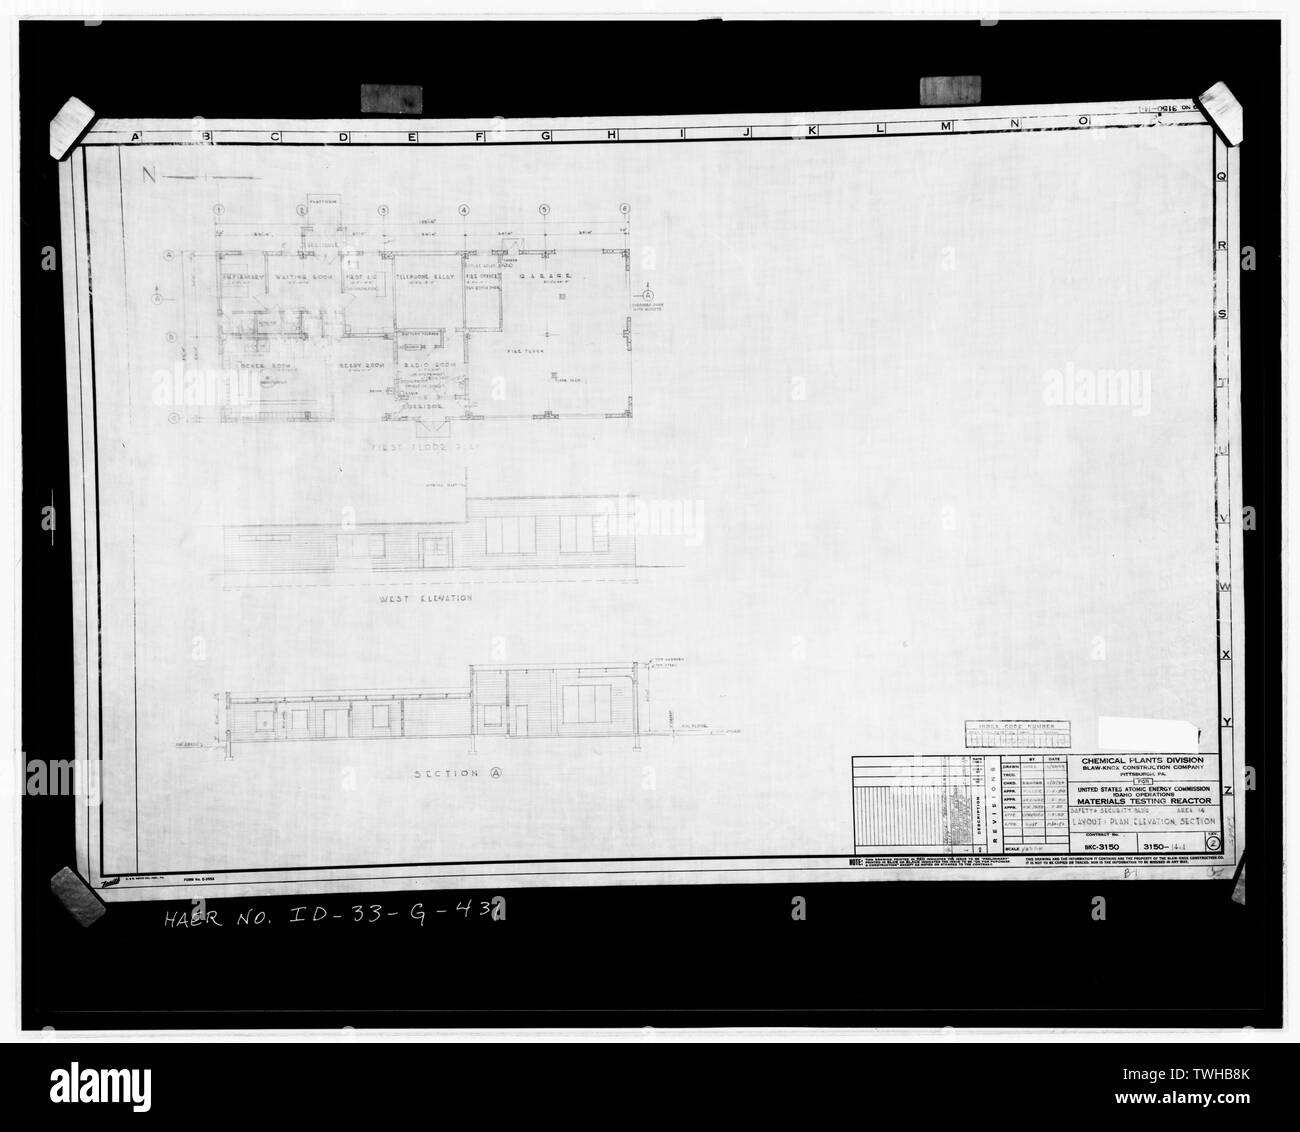 SAFETY AND SECURITY BUILDING, TRA-614. SIMPLIFIED FLOOR LAYOUT AND WEST ELEVATION. BLAW-KNOX 3150-14-1, 1-1950. INL INDEX NO. 531-0614-00-098-100024, REV. 2. - Idaho National Engineering Laboratory, Test Reactor Area, Materials and Engineering Test Reactors, Scoville, Butte County, ID Stock Photo